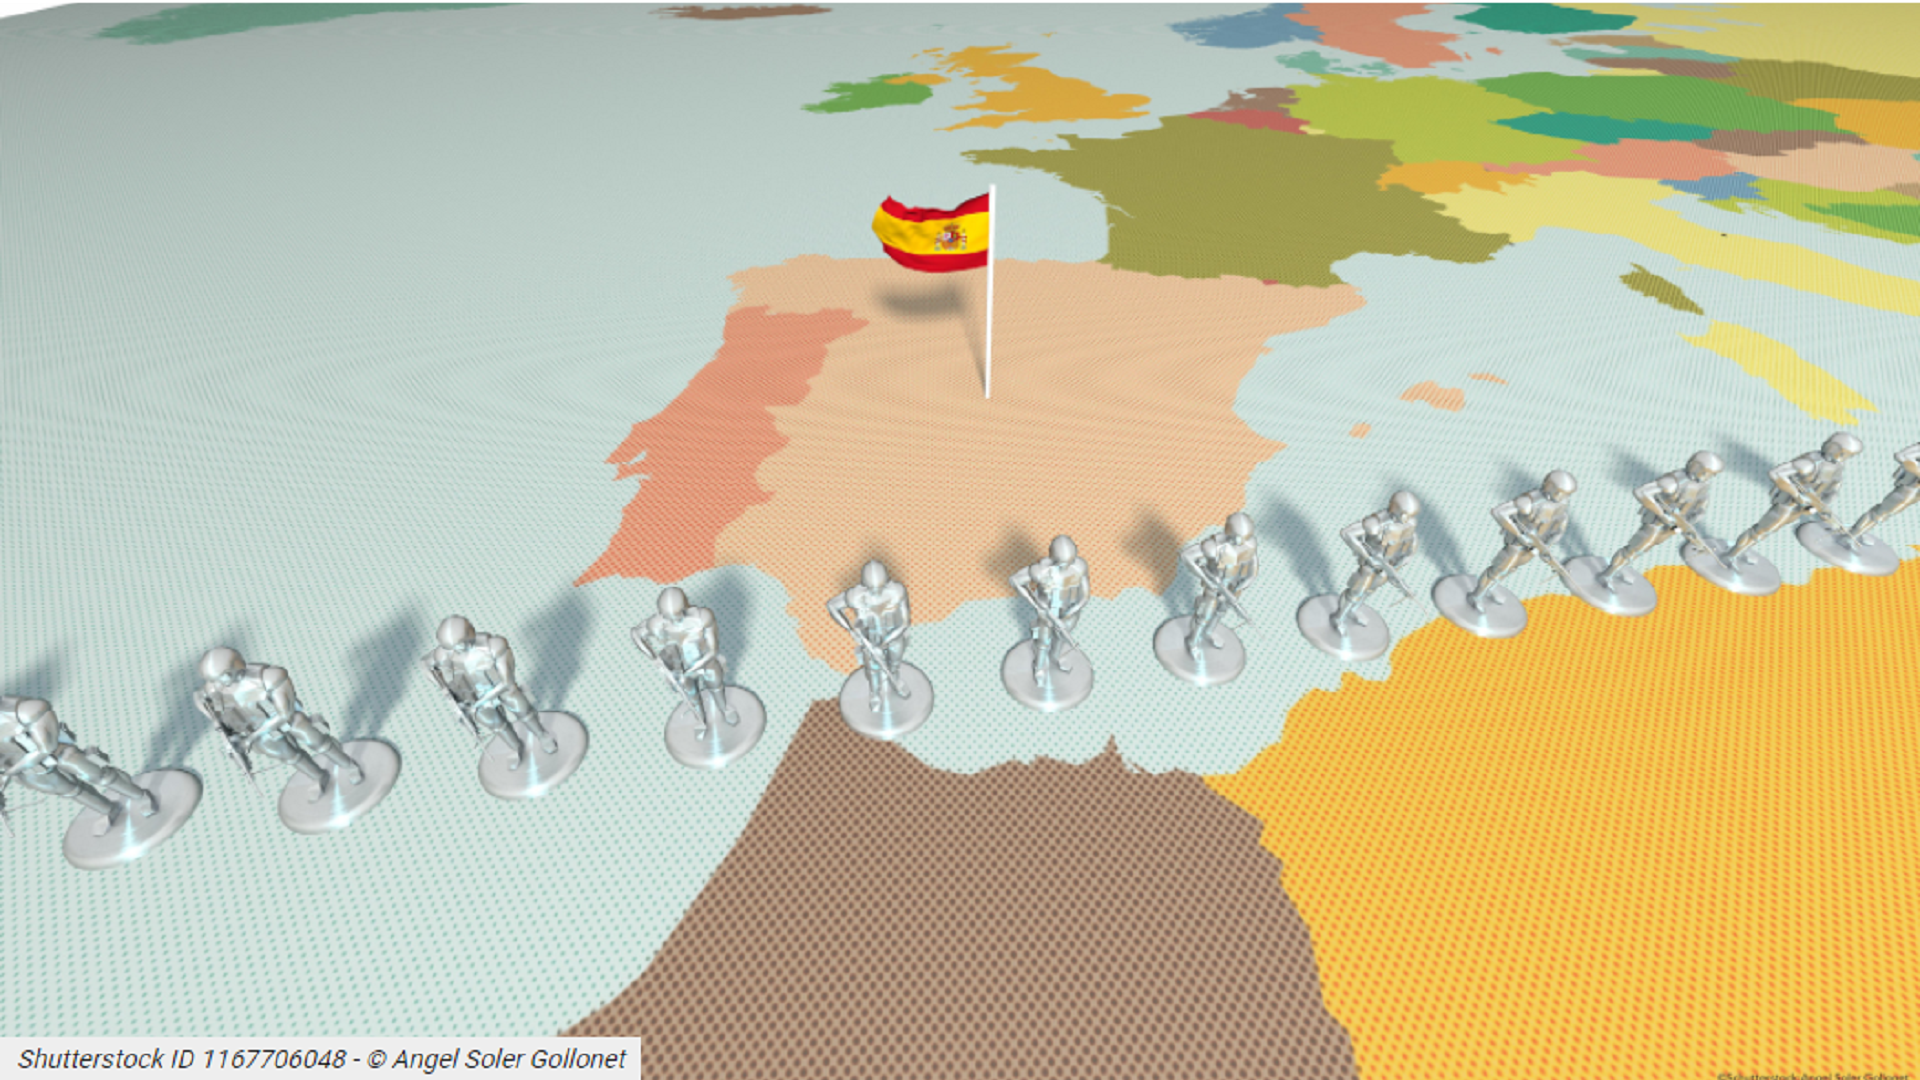 Toy soldiers lined up on the border of Spain and Morocco